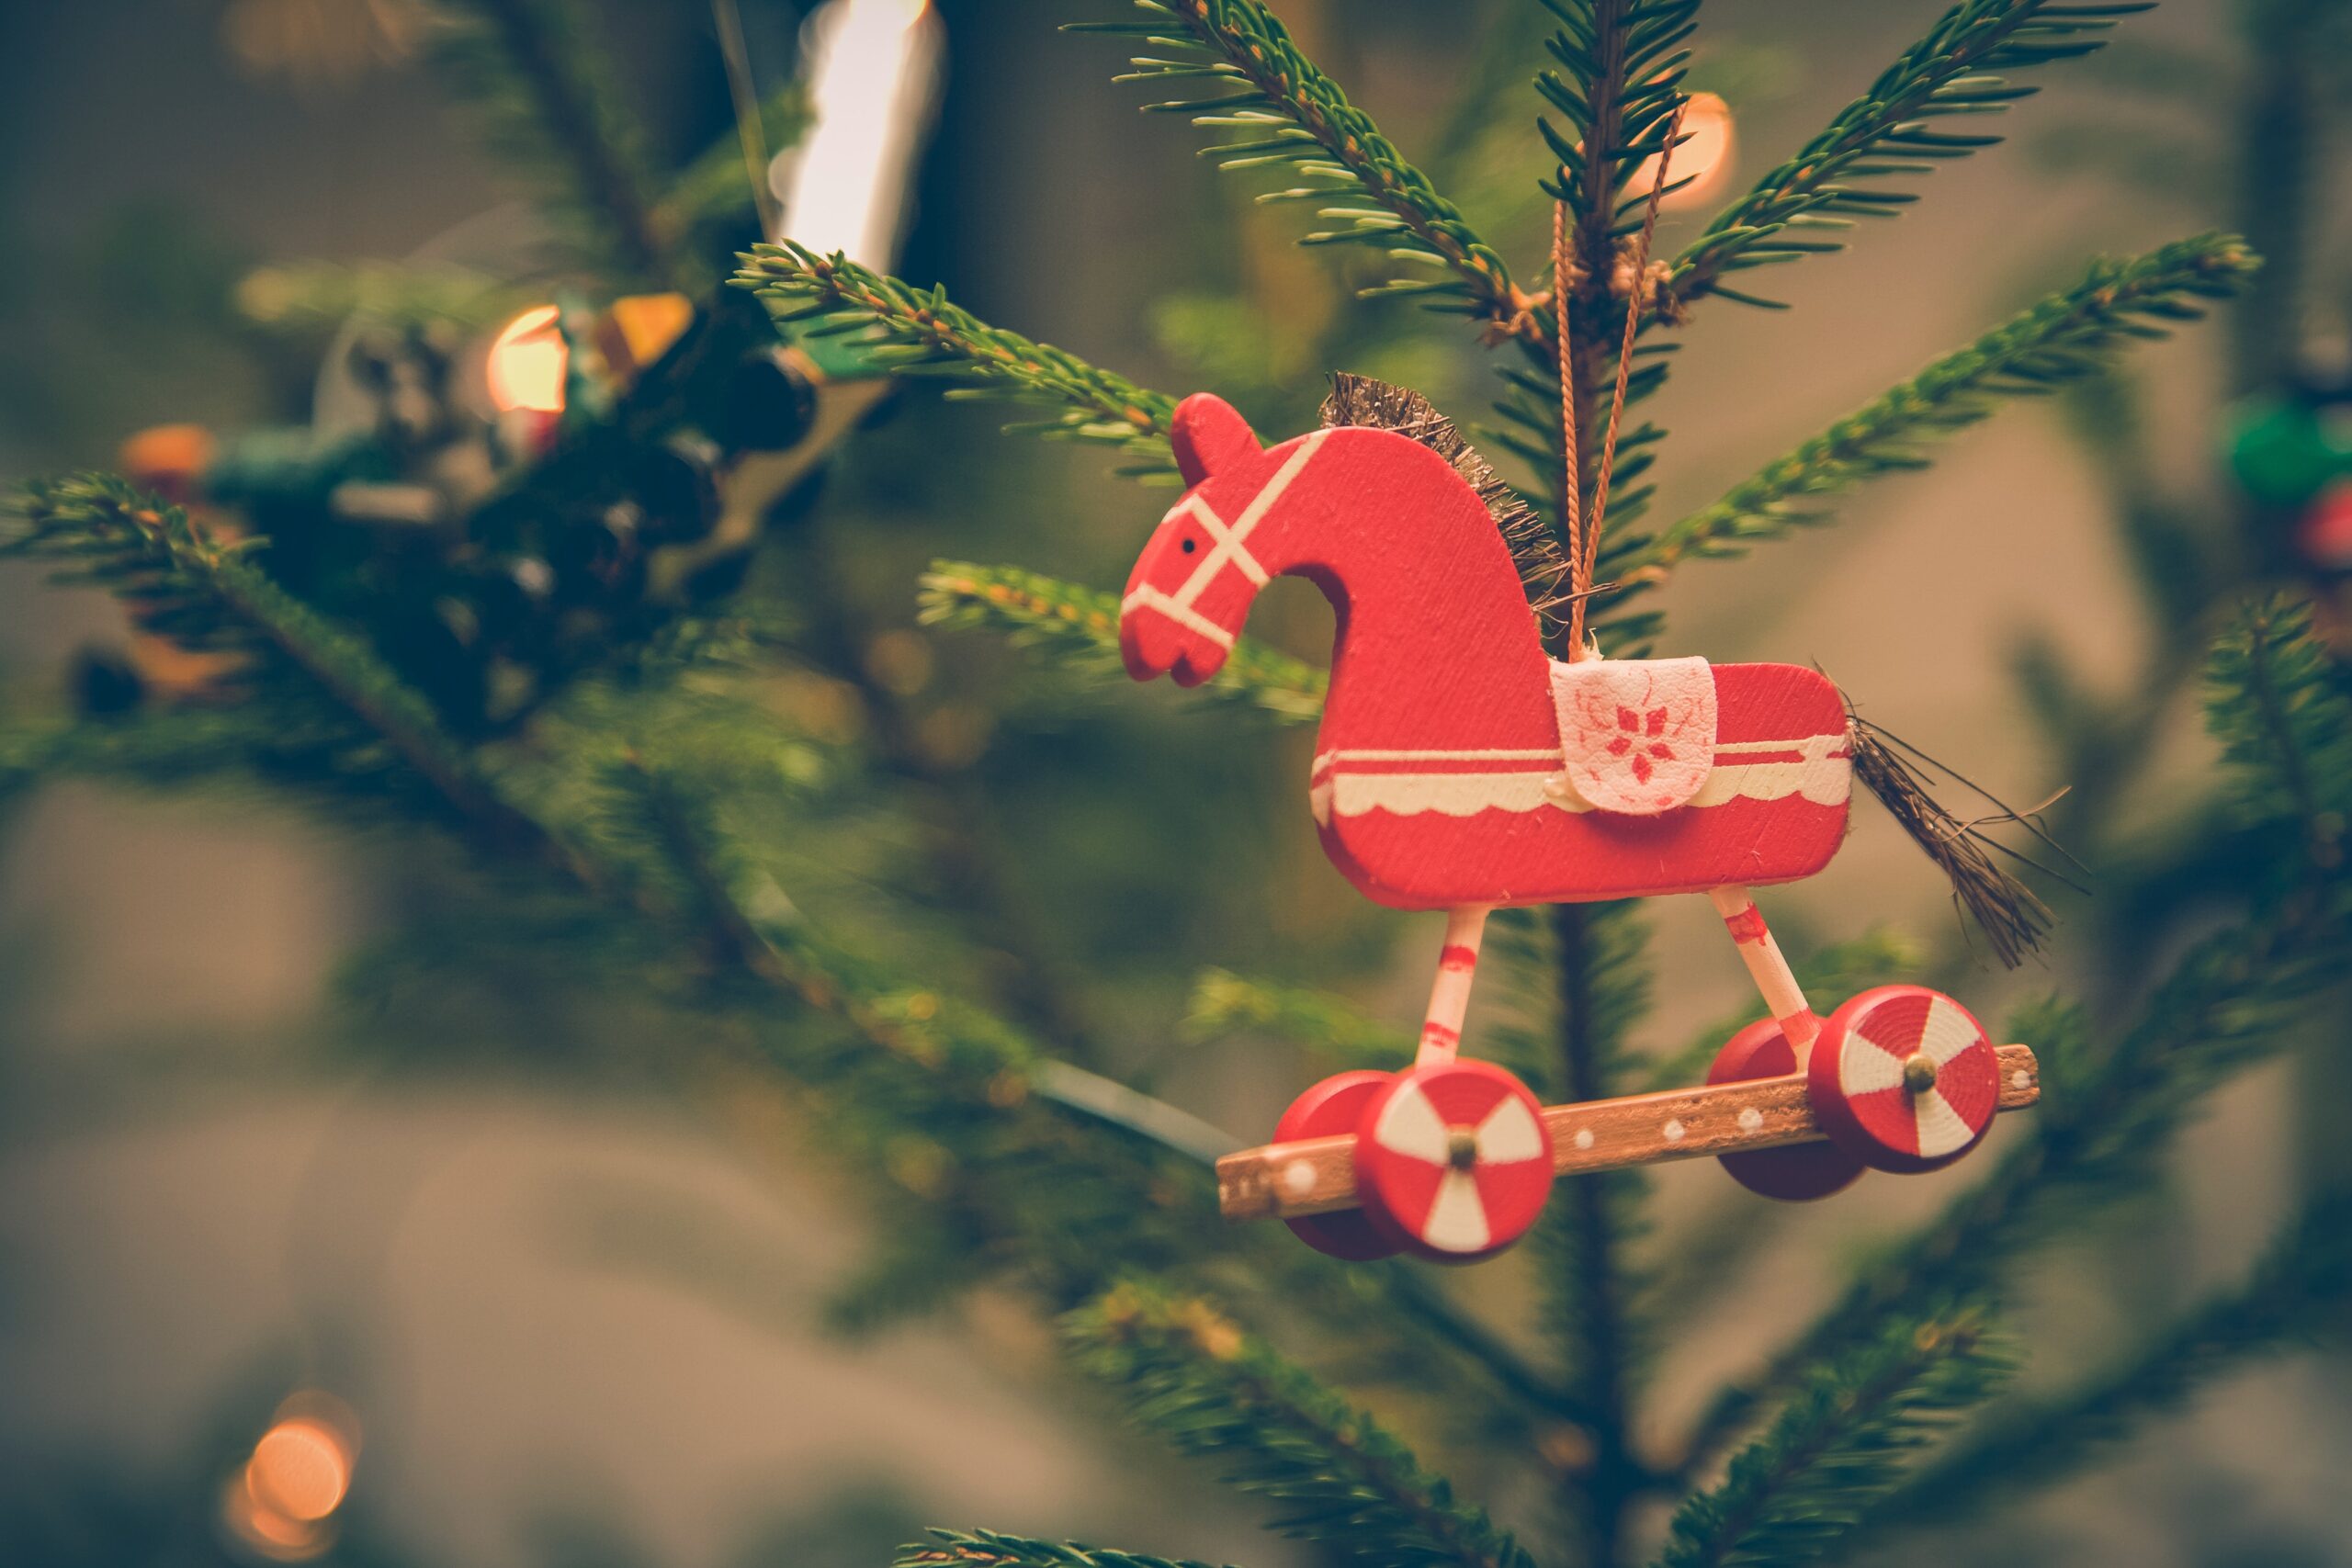 A close-up of a green Christmas Tree with lights. A small red wooden rocking horse decoration in hanging in the foreground.